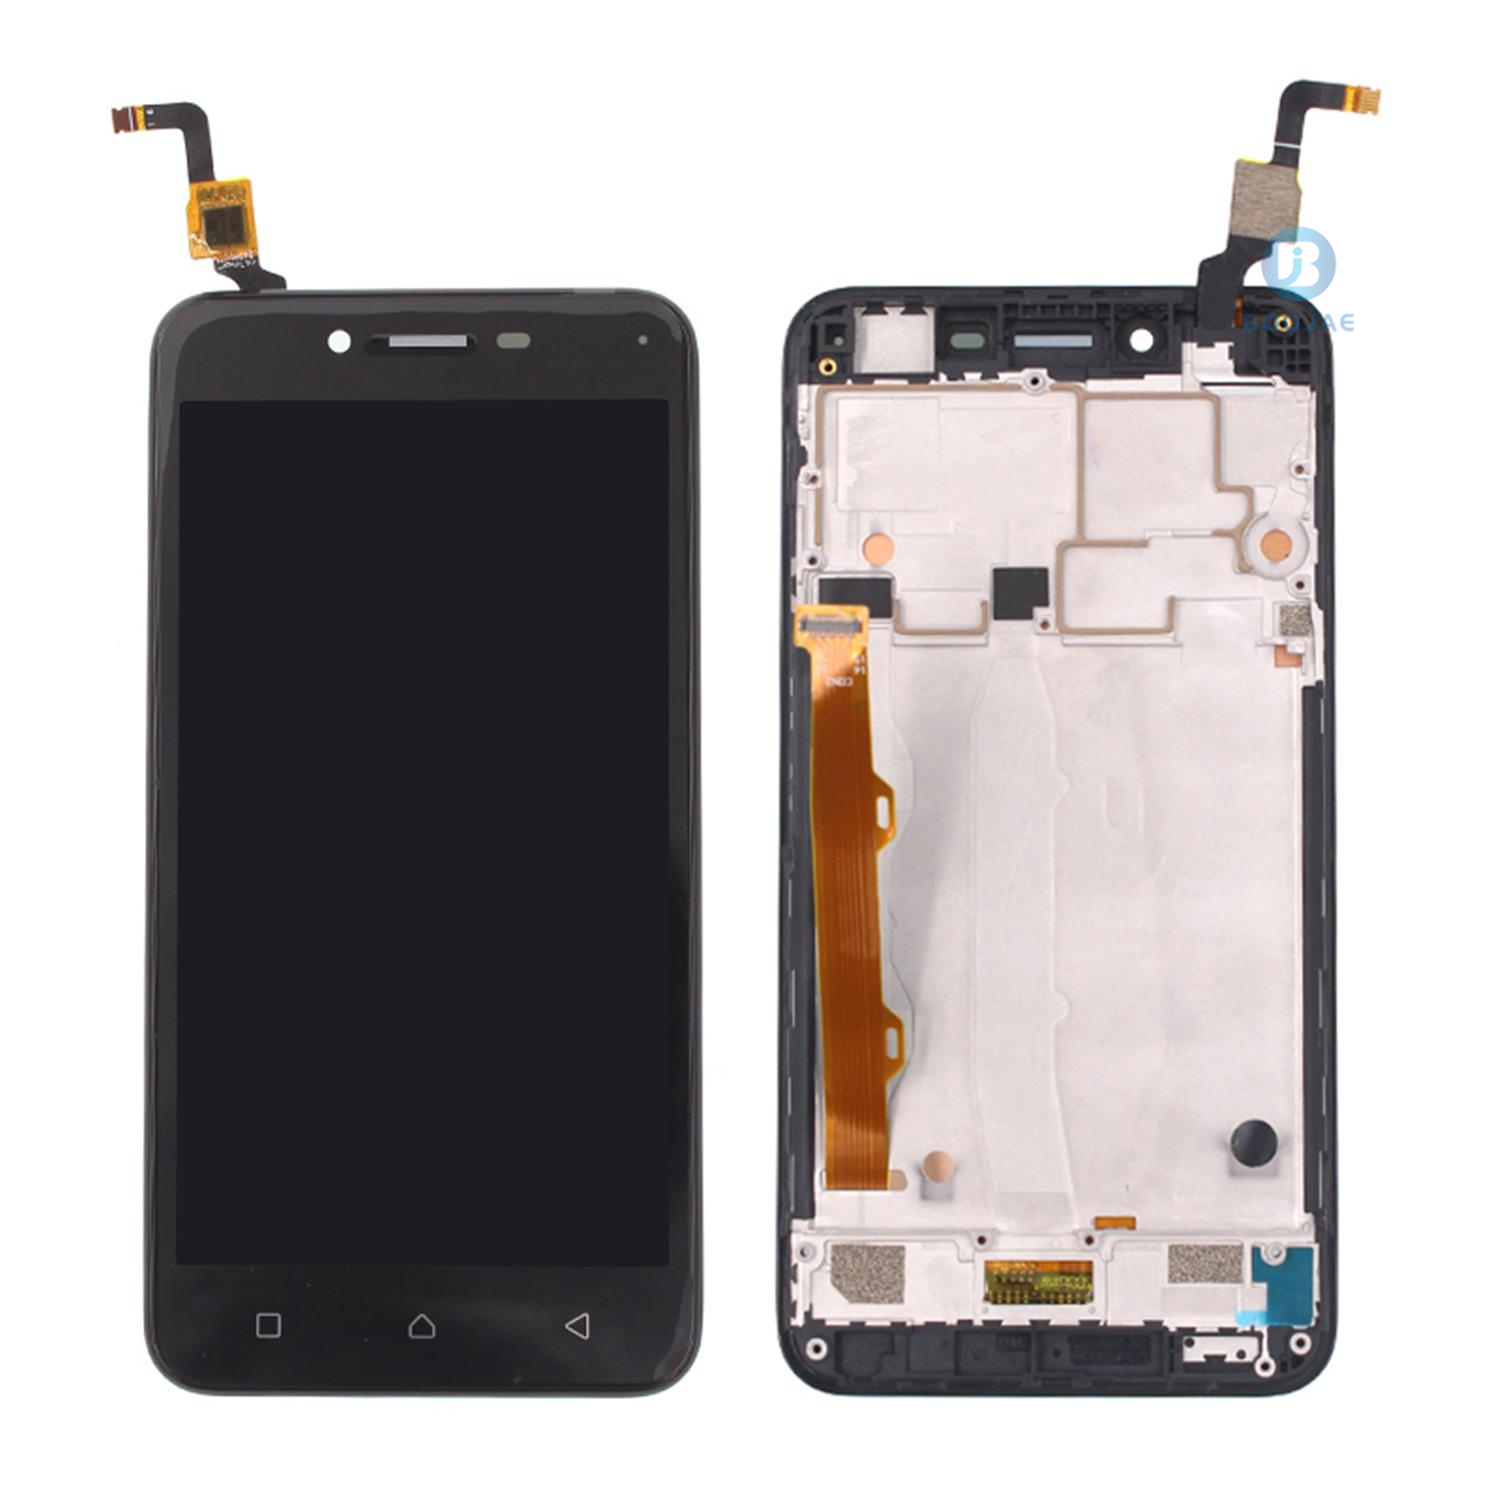 For Lenovo A6020 A40 LCD Screen Display and Touch Panel Digitizer Assembly Replacement